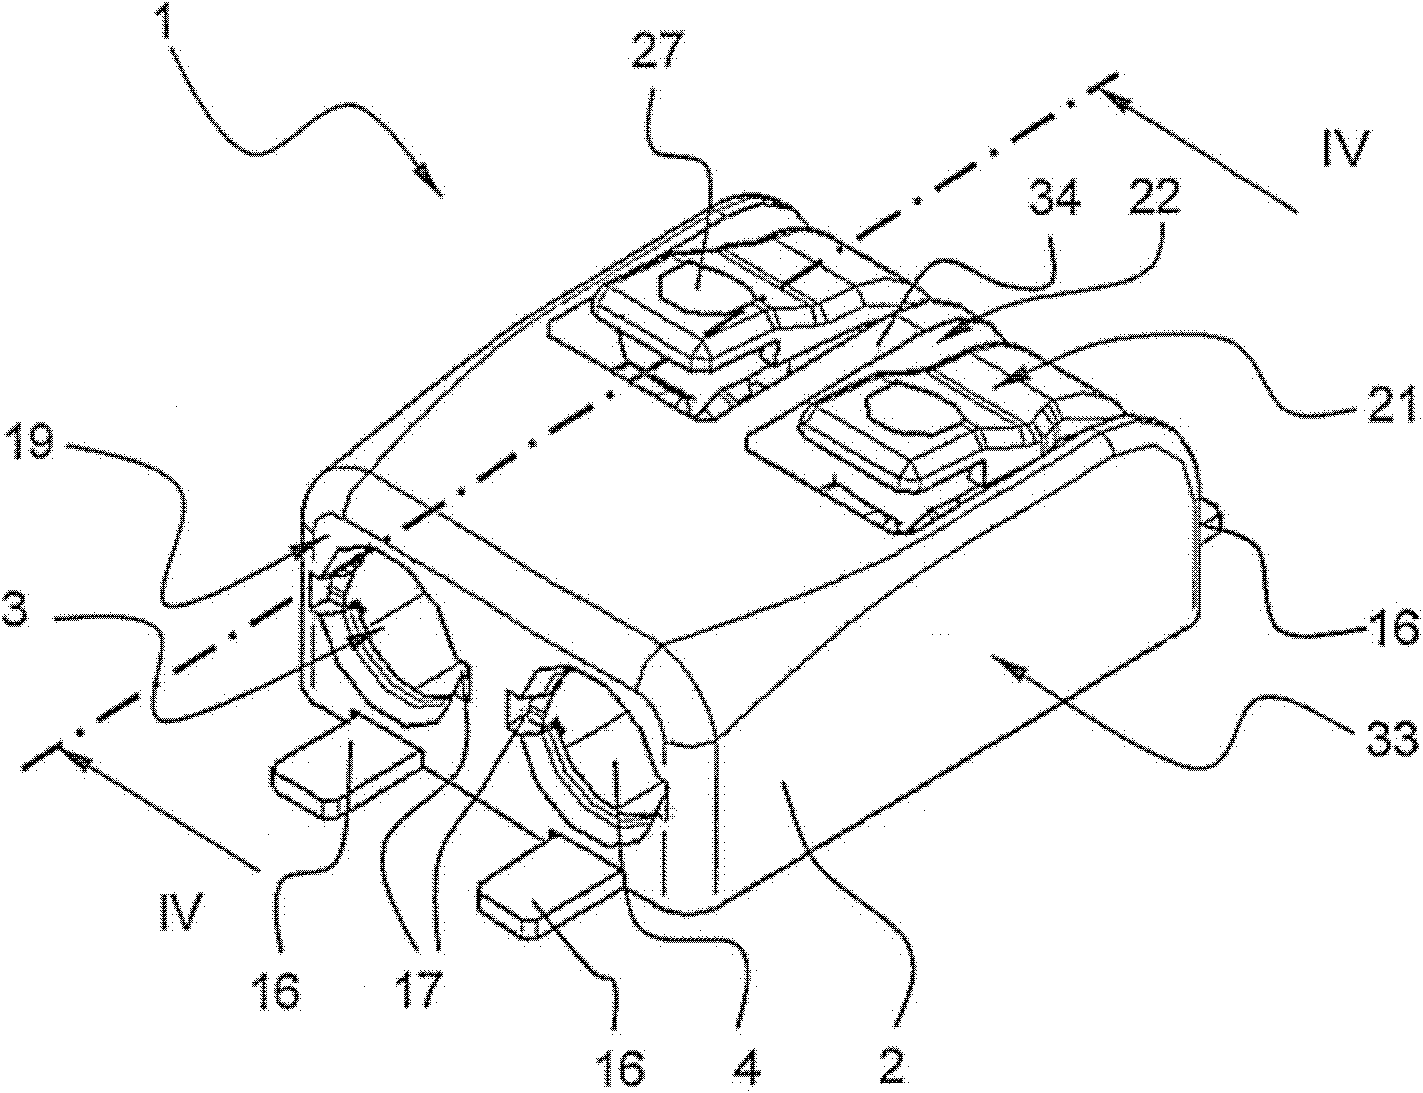 Actuating device for an electrical connection terminal